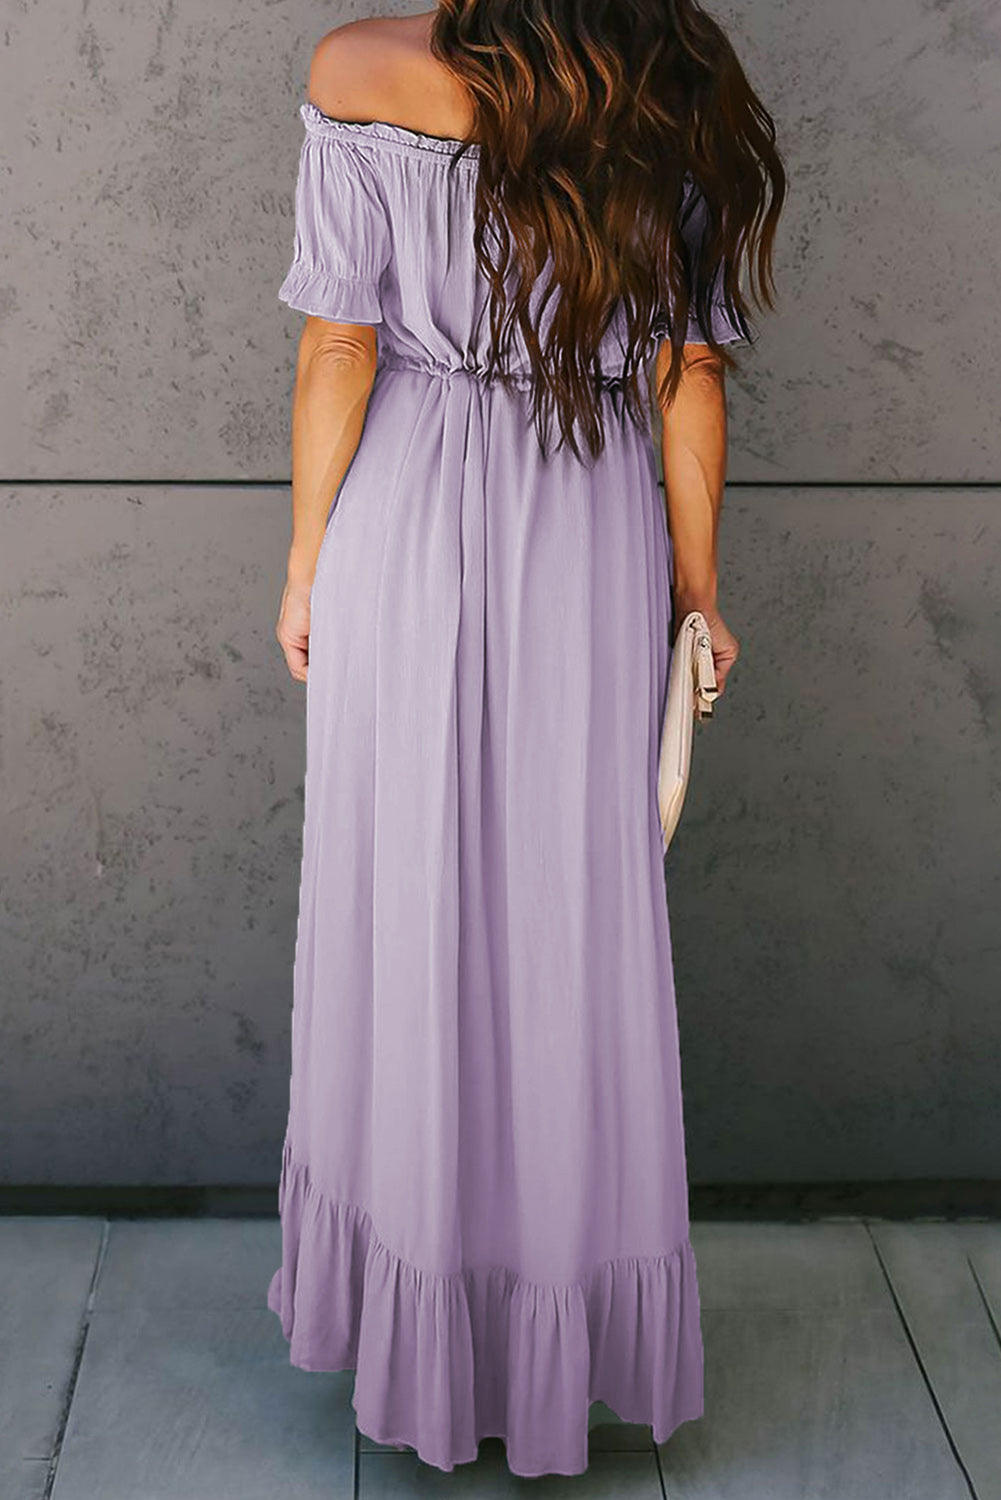 Purple White Off the Shoulder Dress High Low Maxi Dress  LC611566-8